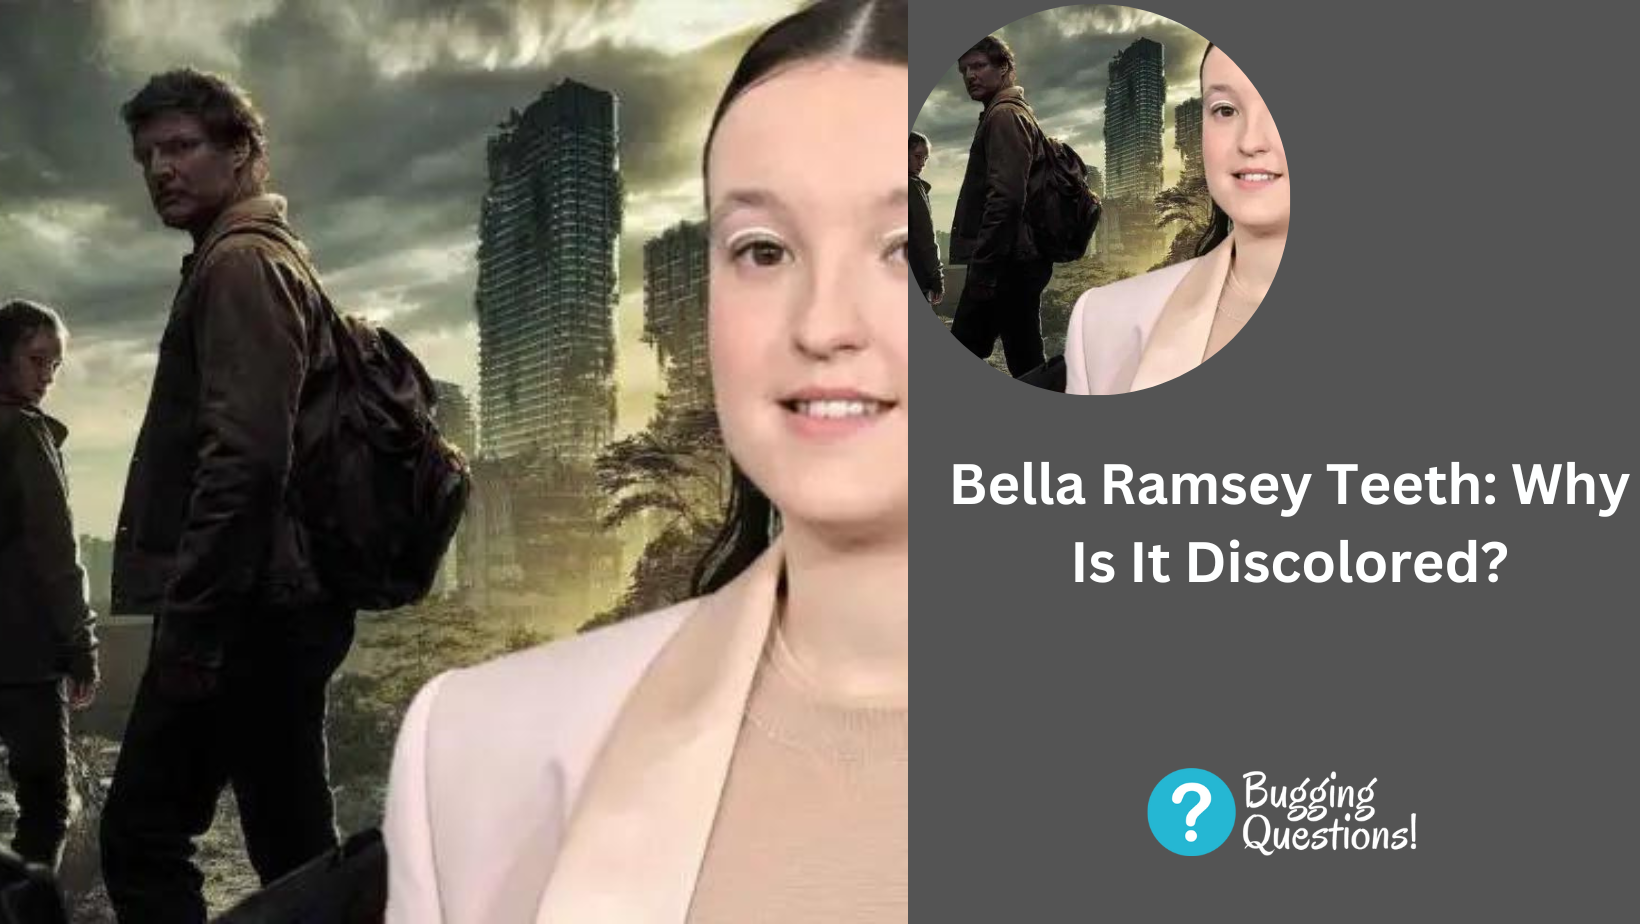 Bella Ramsey Teeth: Why Is It Discolored?